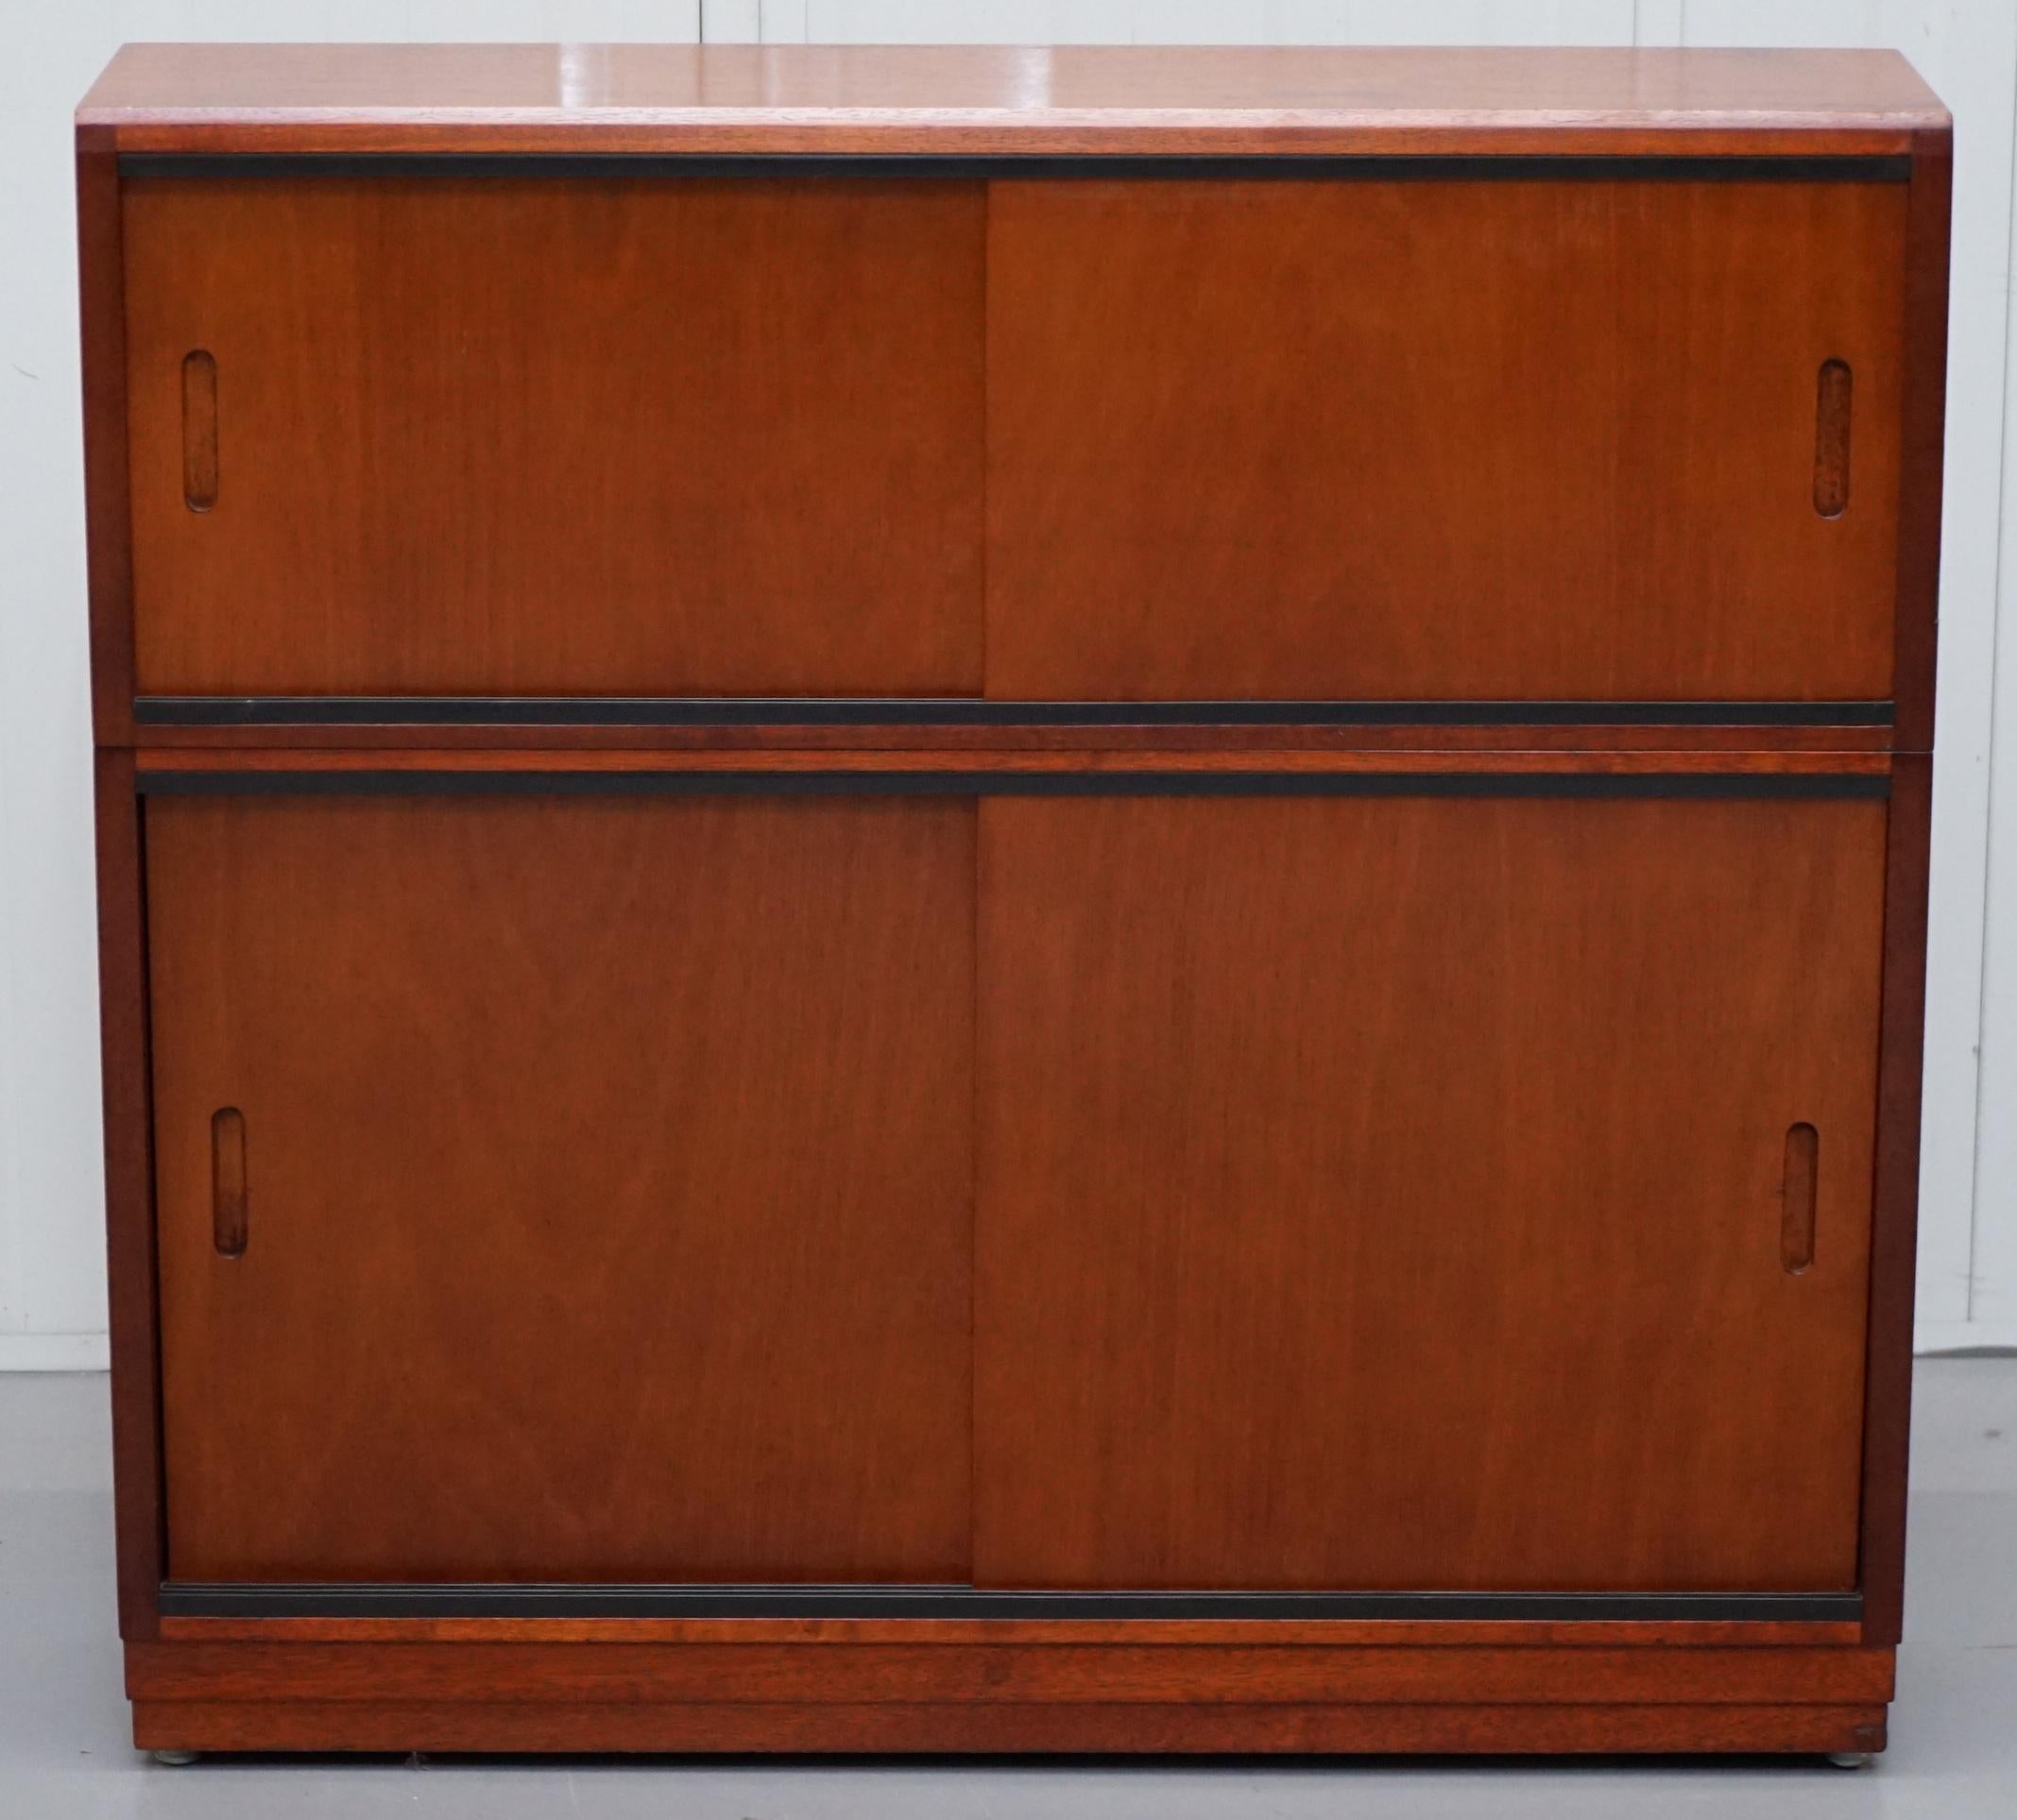 We are delighted to this lovely vintage Mid Century modern stackable sideboard bookcase with sliding doors

A good looking and utilitarian piece, the bookcase is made up of two modular sections, if you can find who made it they would have sold